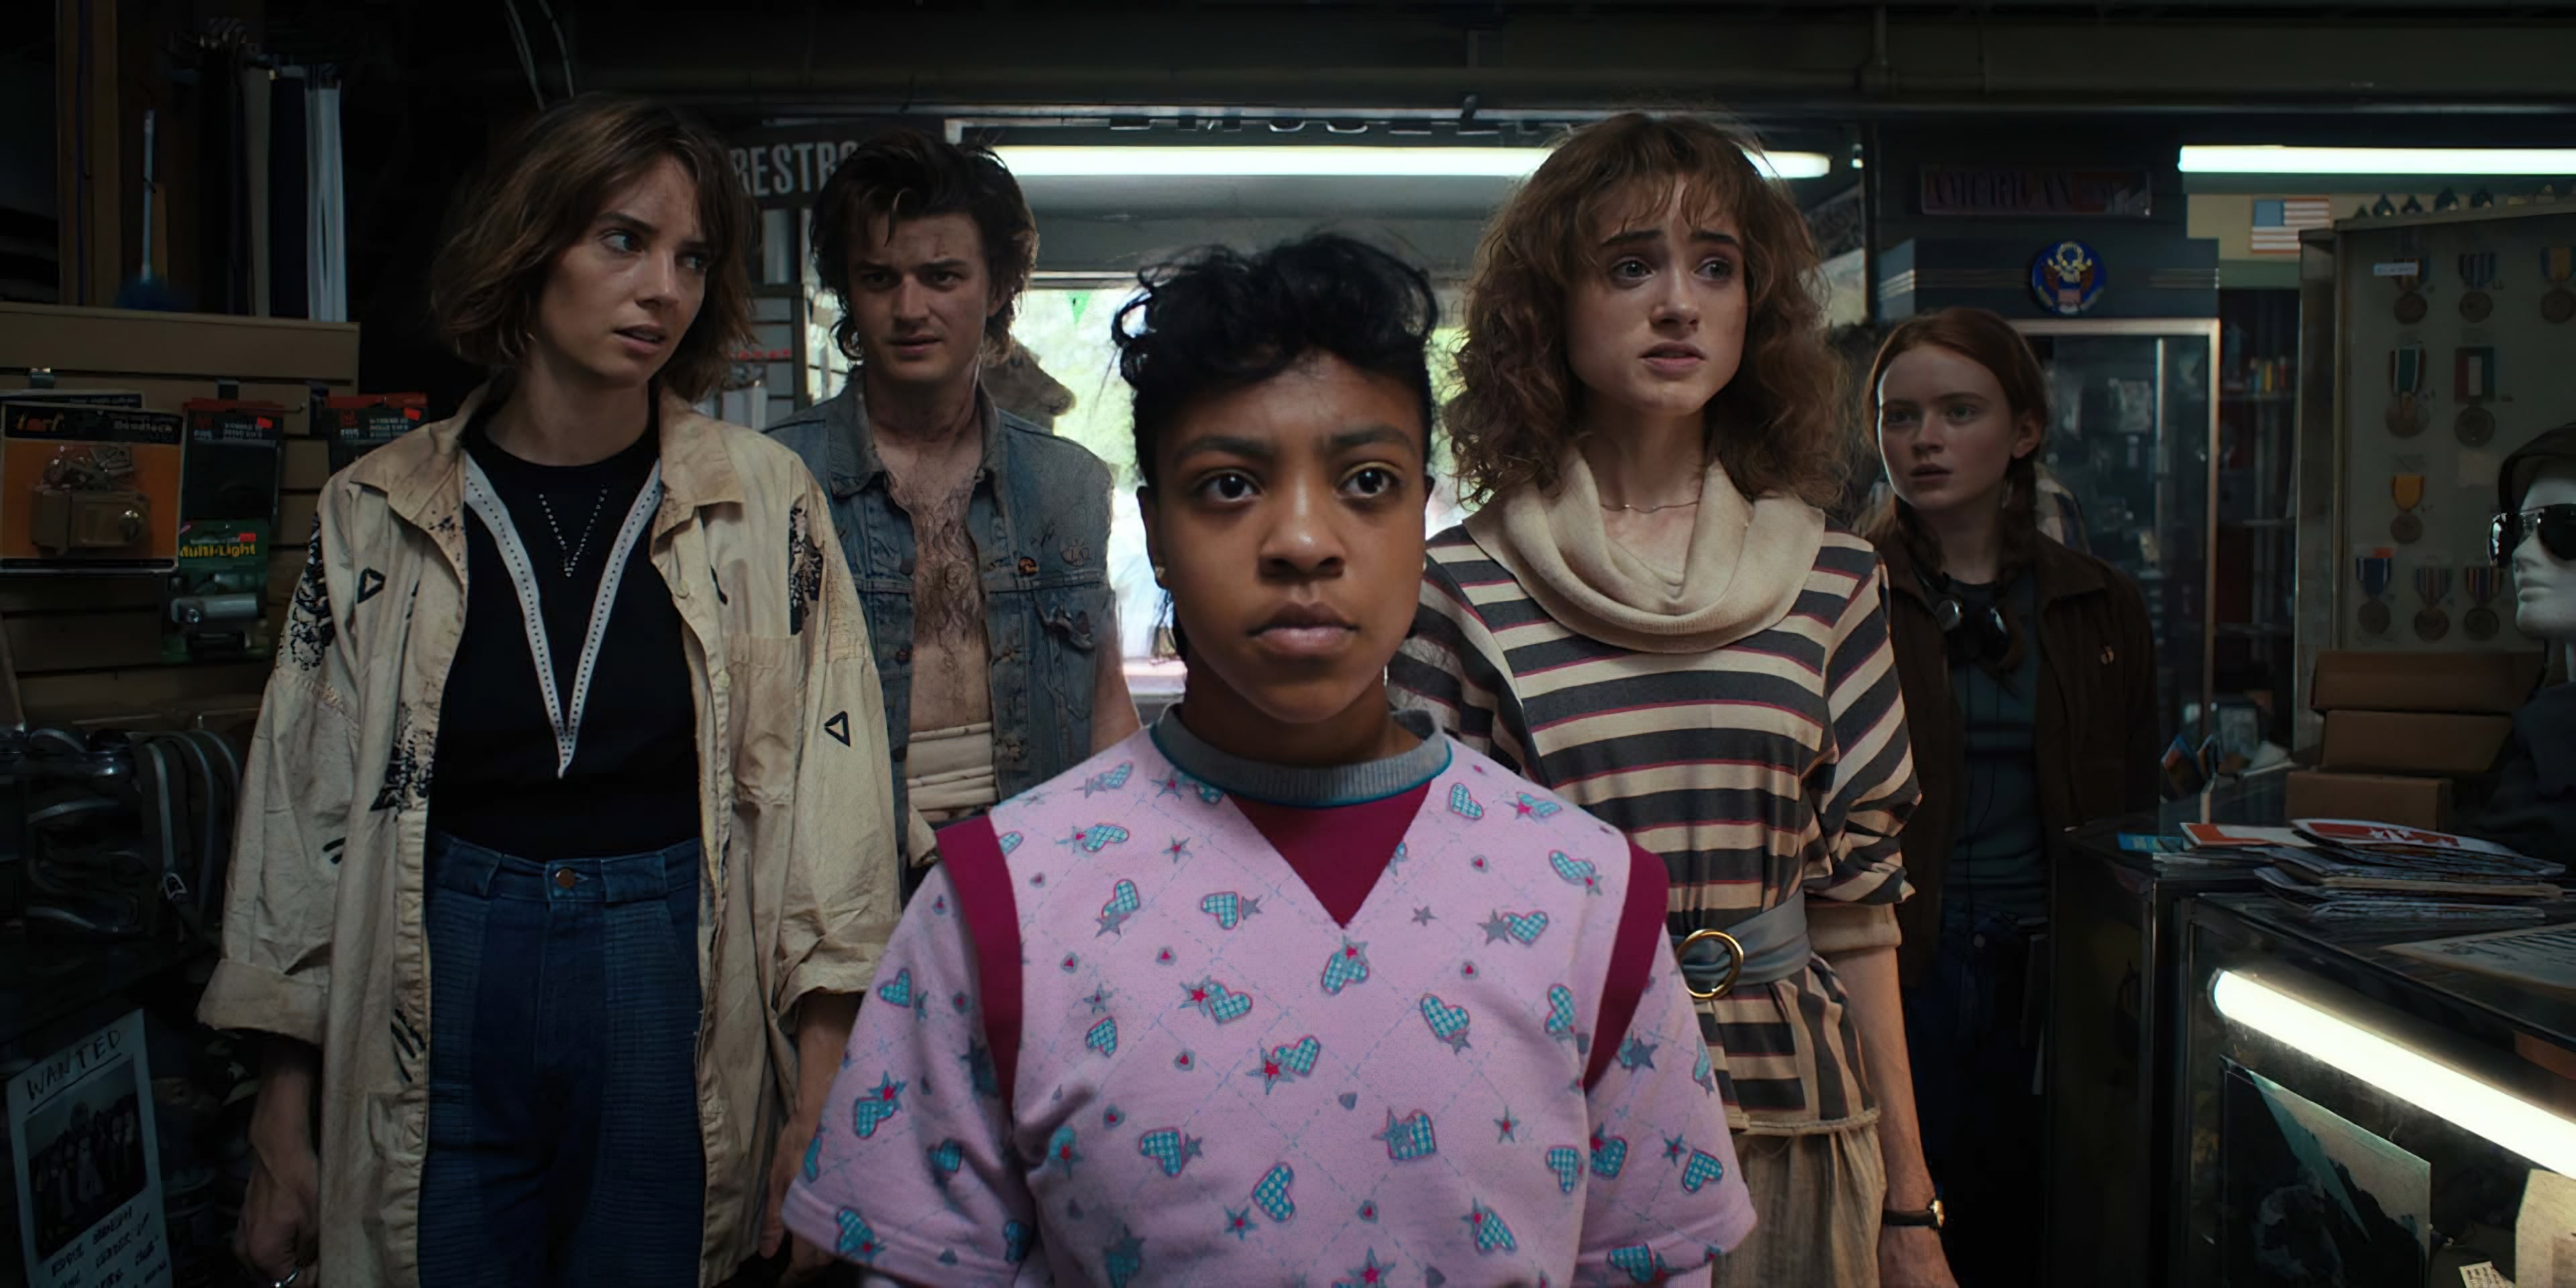 Stranger Things Season 3: 8 Biggest Questions After The Trailer – Page 3